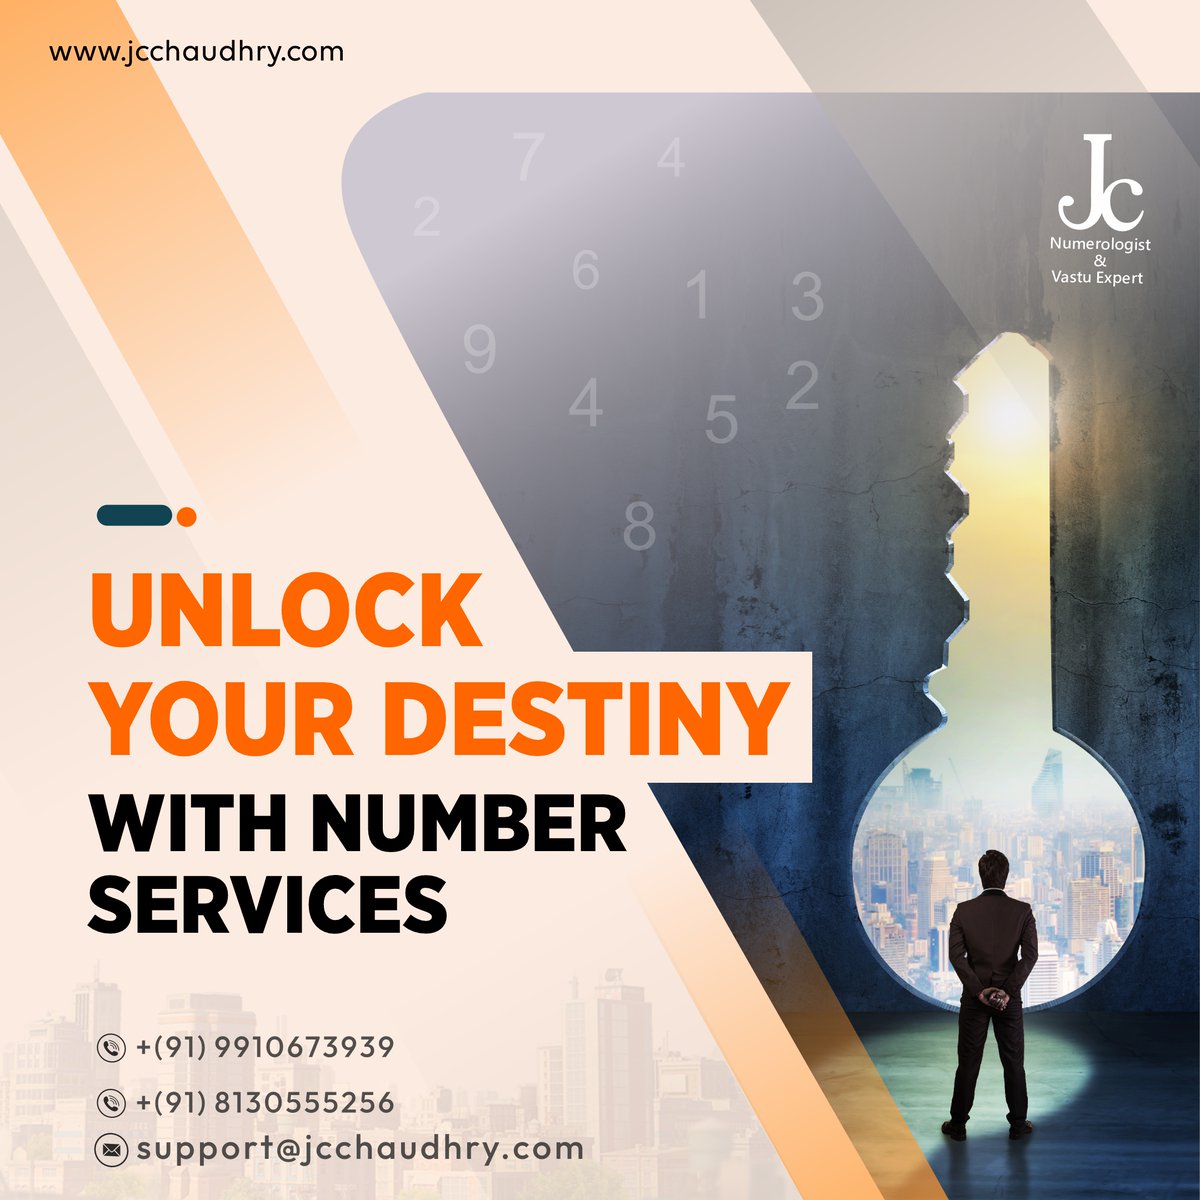 We are surrounded by numbers. 

So, why not keep the positive ones? 

Get your numbers checked by Dr. J C Chaudhry to unlock your destiny.

#numerologyexpert #successmindset #BestNumerologistInDelhi #numerologyconsultation #numerologyprediction #drjcchaudhry #chaudhrynummero